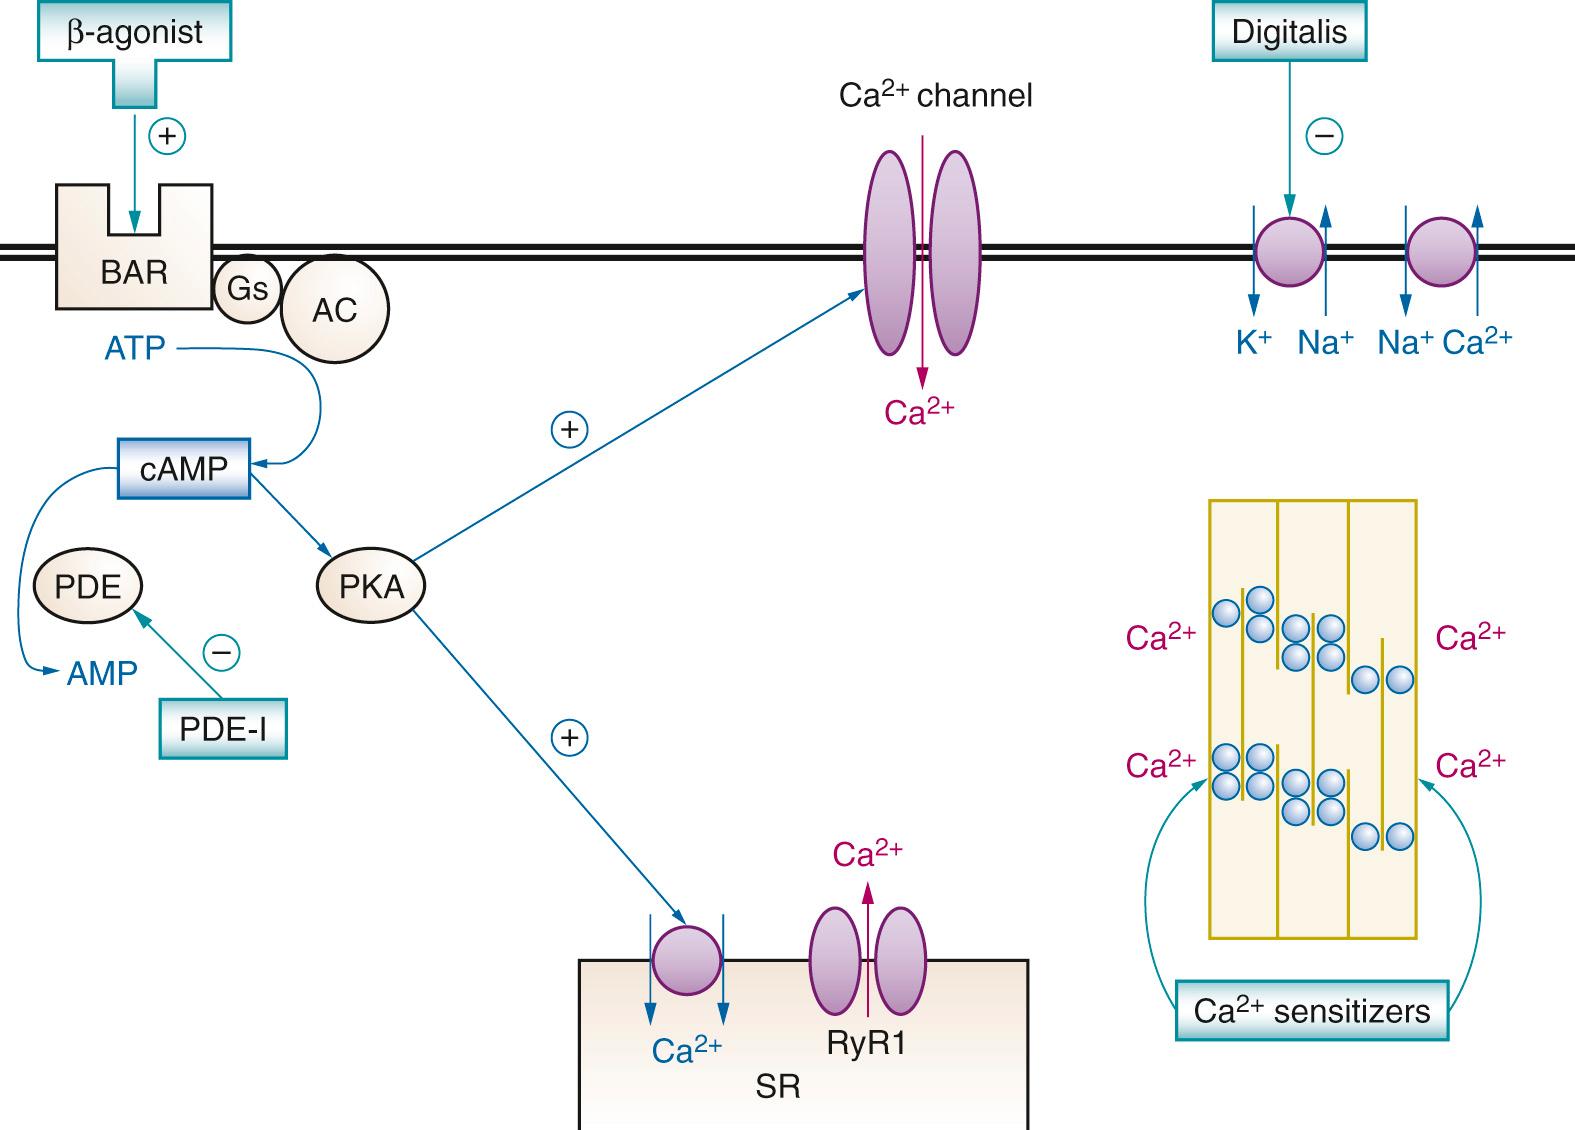 Fig. 25.2, Mechanisms of action of selected positive inotropes indicating where the agents act in a cardiomyocyte. Ultimately cytosolic calcium ion (Ca 2+ ) and its interaction with the actin-myosin complex cause myocyte contraction. The β agonists and phosphodiesterase inhibitors accomplish this by increasing the activity of protein kinase A (PKA). The calcium sensitizers act directly by increasing Ca 2+ affinity for troponin C at the actin-myosin complex. Digitalis compounds inhibit sodium-potassium adenosine triphosphatase (Na + ,K + -ATPase [Na + pump]) indirectly increasing intracellular Ca 2+ . AC, Adenylyl cyclase; AMP, adenosine monophosphate; BAR, β-adrenergic receptor; cAMP, cyclic adenosine monophosphate; Gs, G stimulating α subunit; PDE, phosphodiesterase; PDE-I, phosphodiesterase inhibitor; PKA, protein kinase A; SR, sarcoplasmic reticulum.